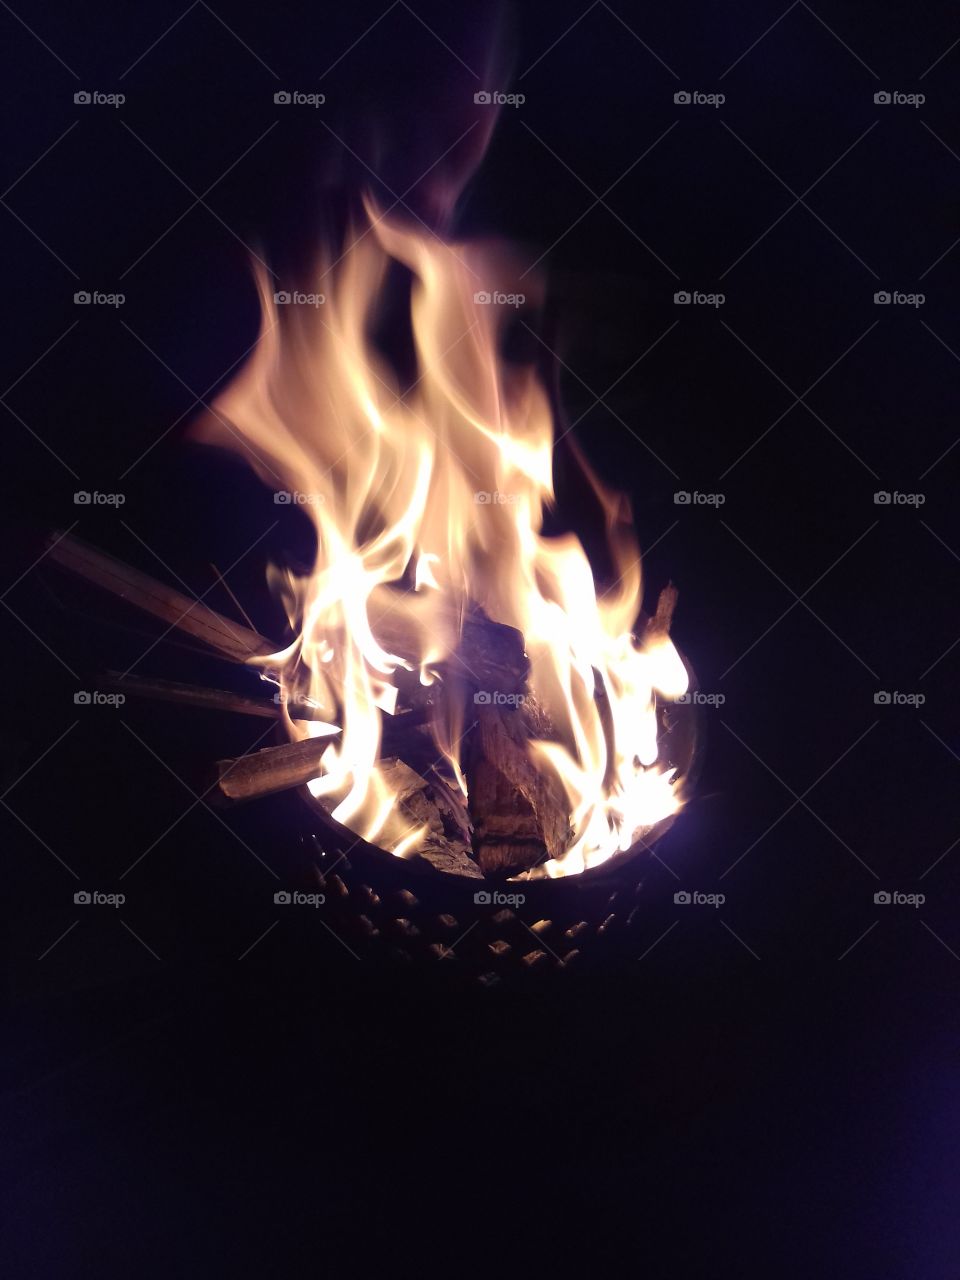 bonfire in a room in winter traditional in this part of India...done to beat cold season...people who could afford charchoal don't use firewood for it is tidier and healthier as charcoal produce less smoke and ash